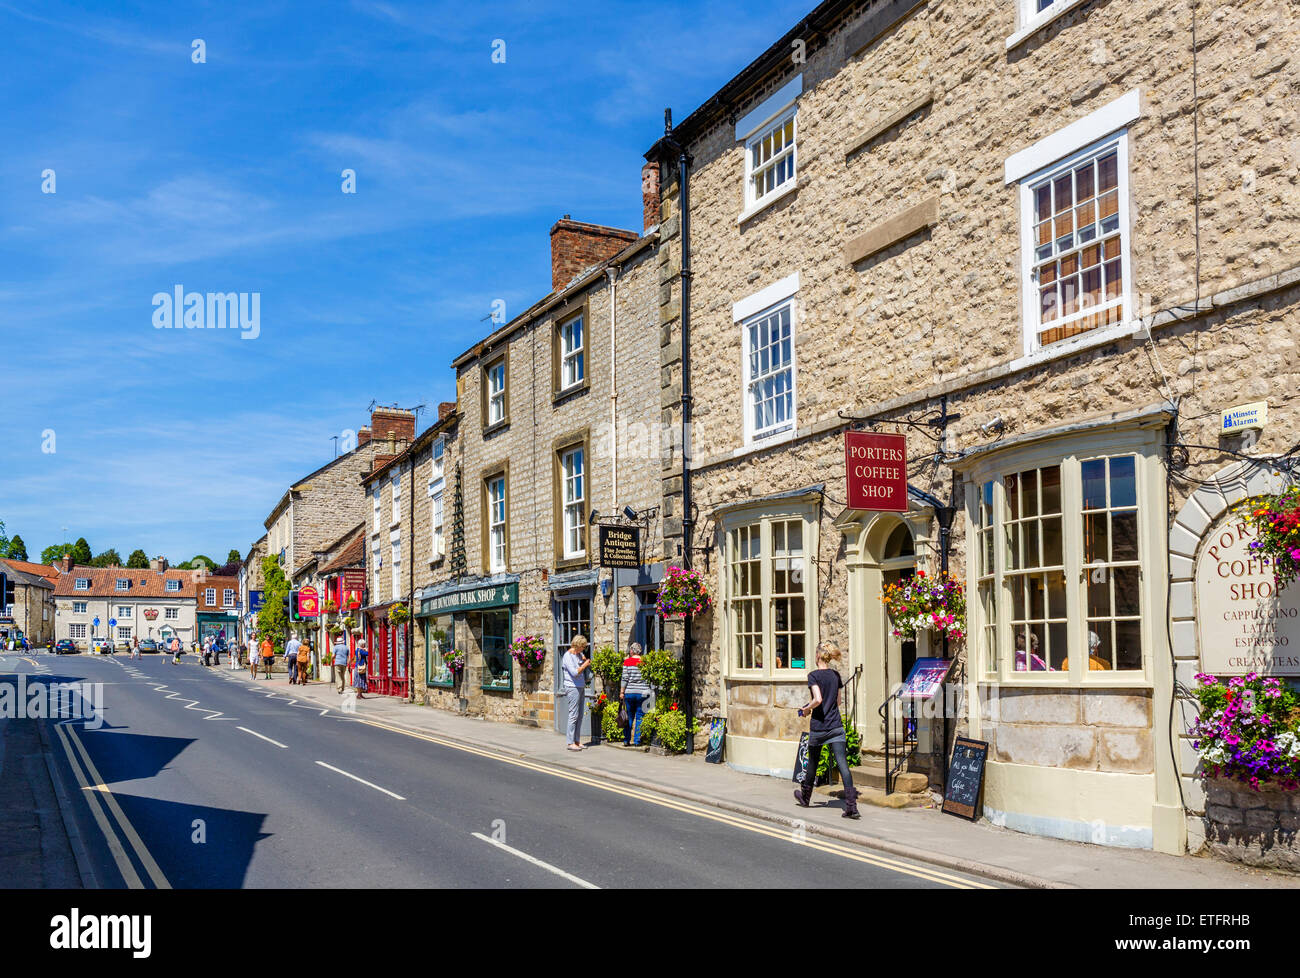 Shops and cafes on Bridge Street in the market town of Helmsley, North Yorkshire, England, UK Stock Photo